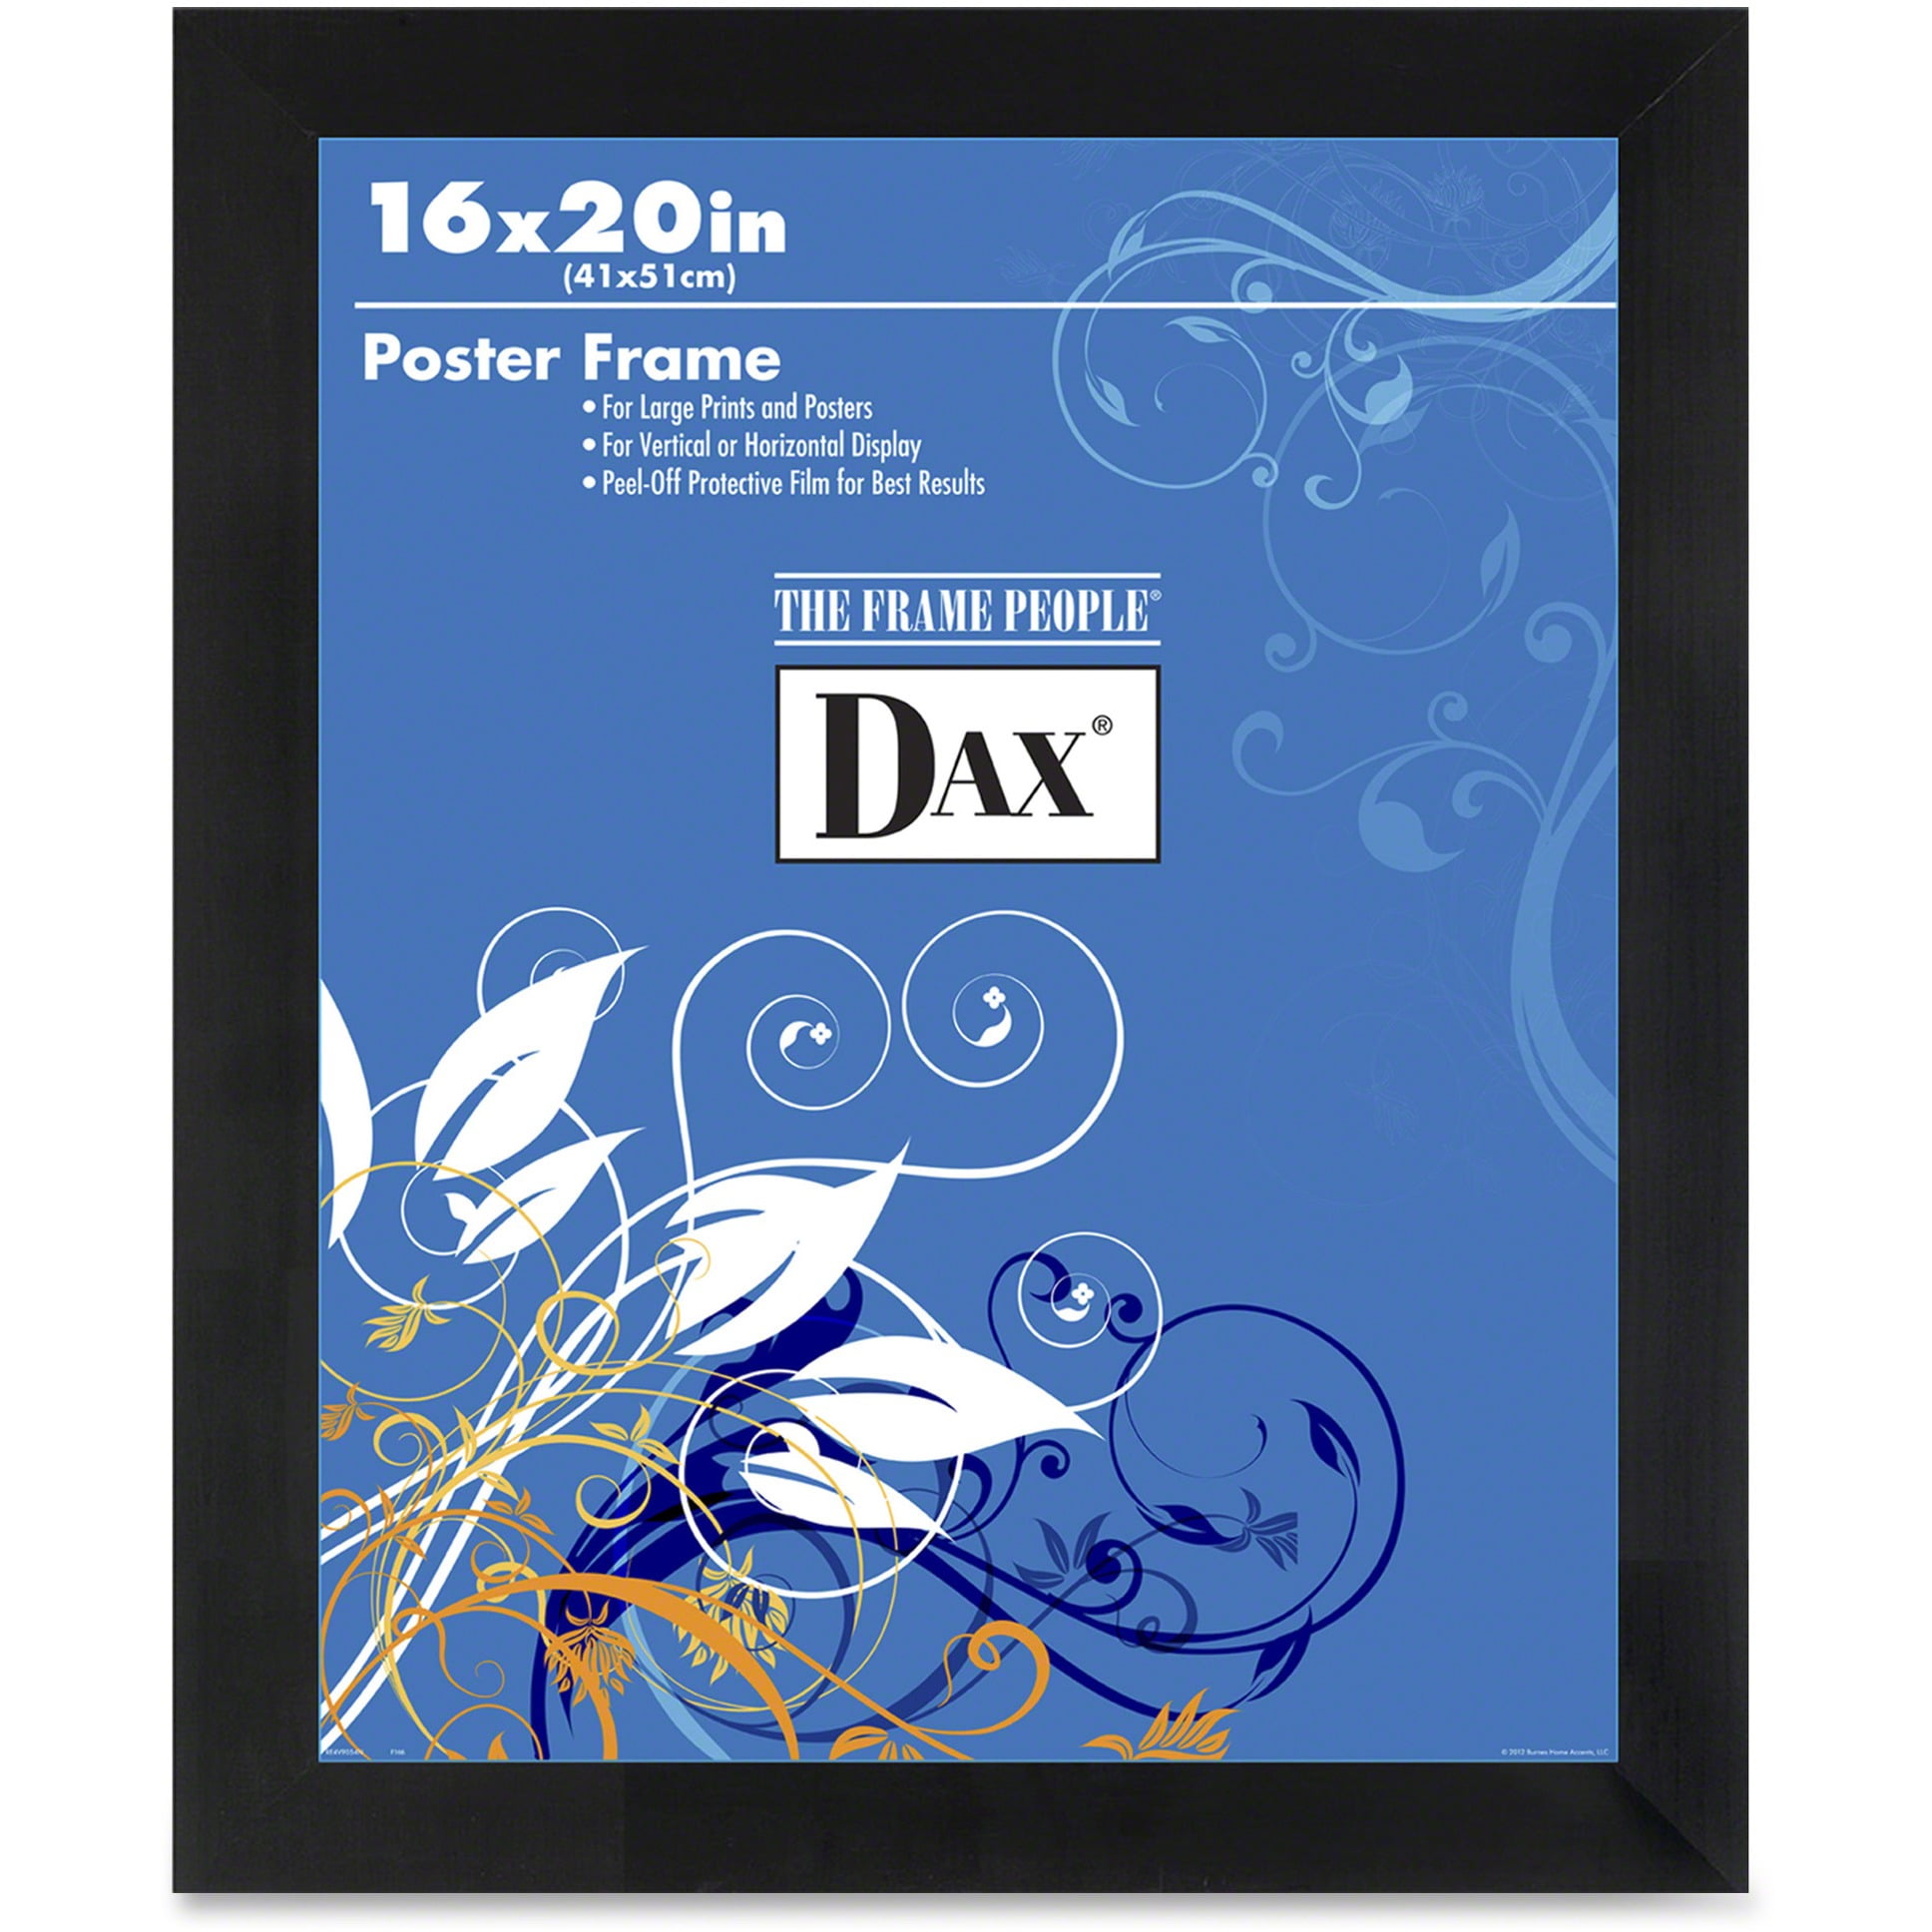 Poster Picture Frames Display Protect Cover Showcase Certificate Multiple Sizes 